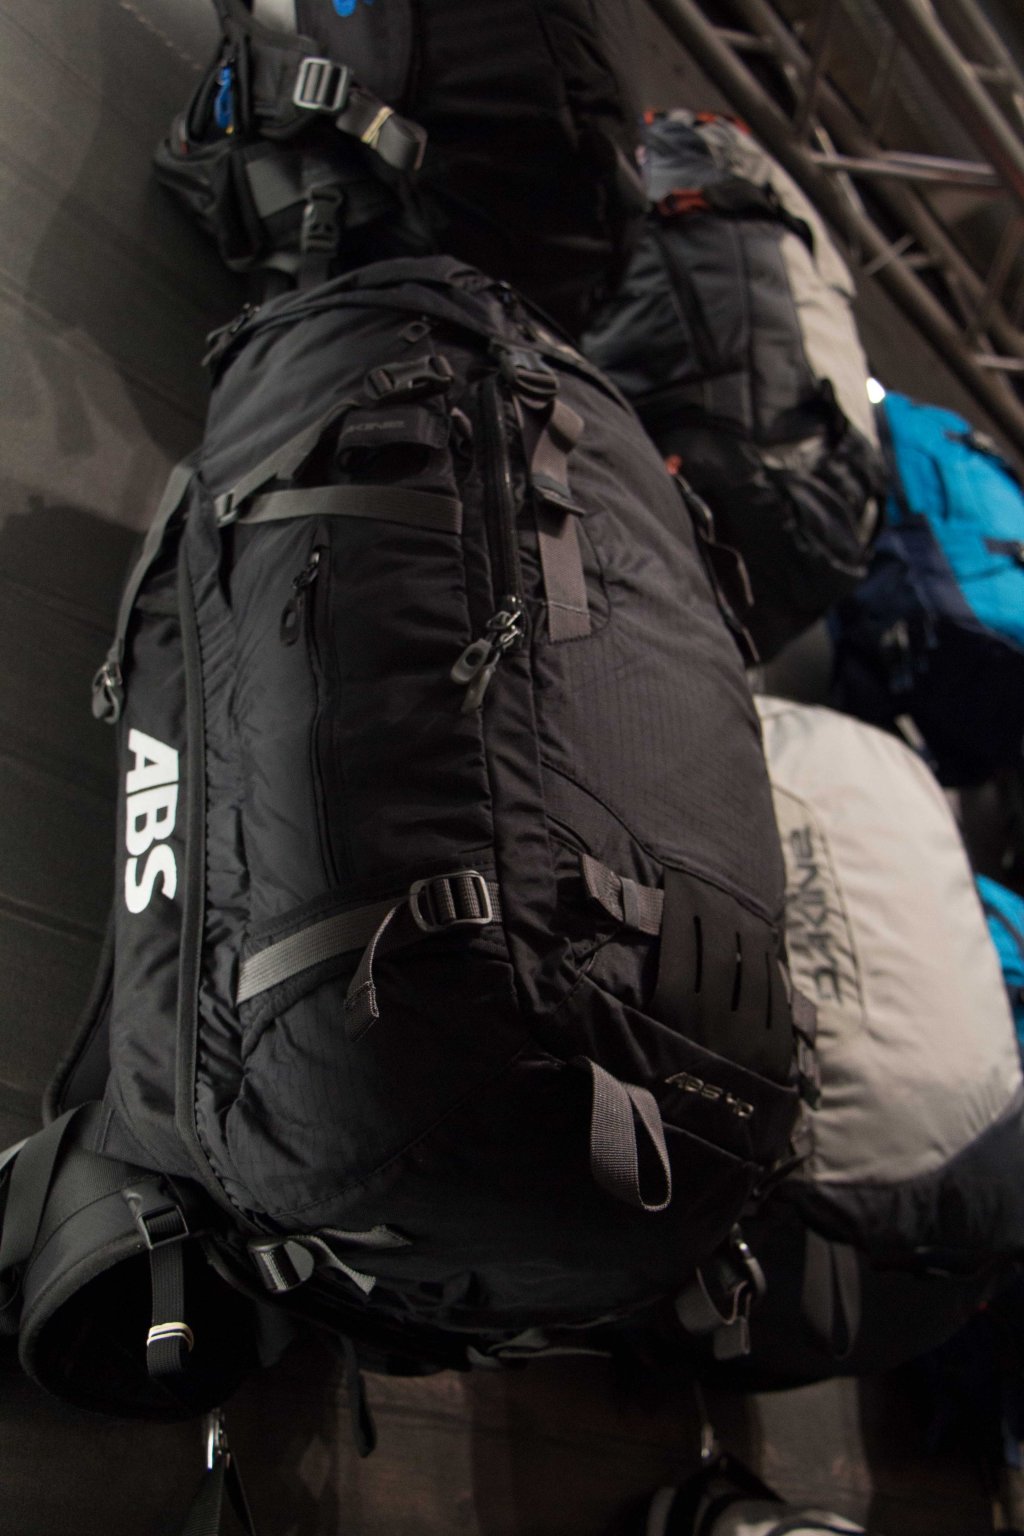 Dakine is also there: Dakine airbag backpack with ABS technology